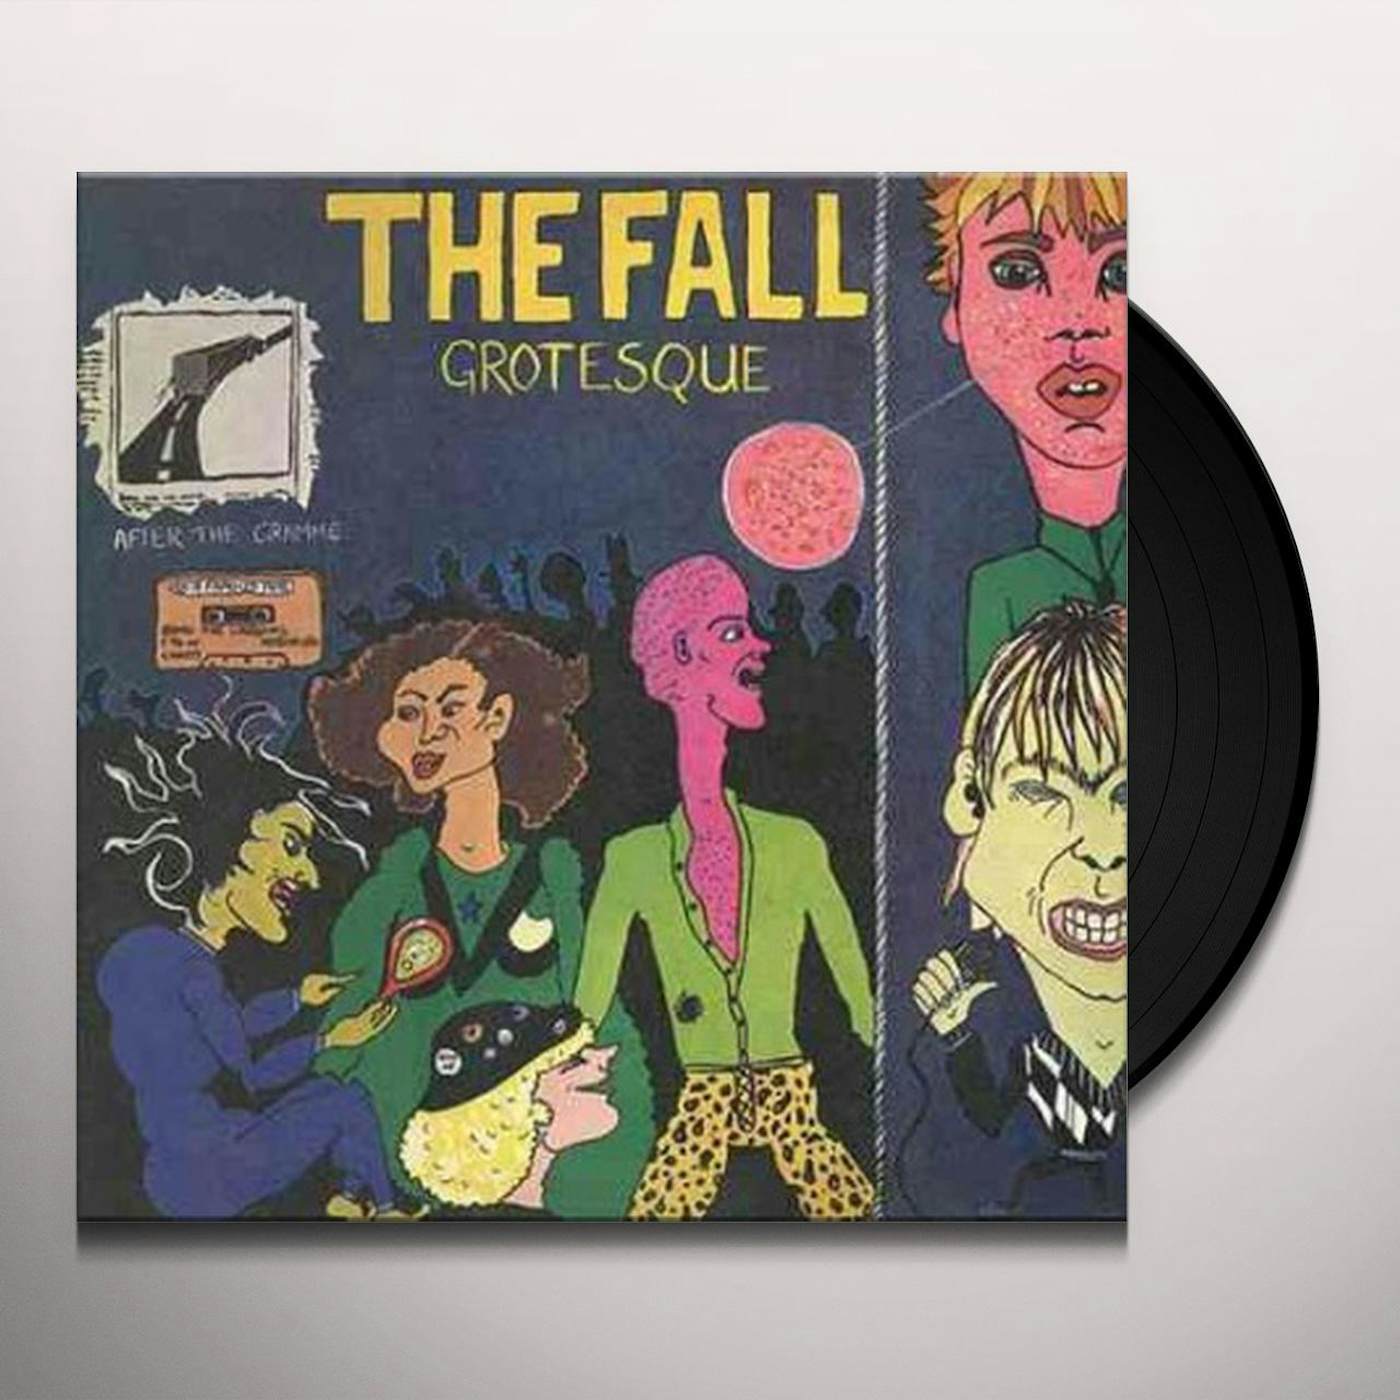 The Fall GROTESQUE (AFTER THE GRAMME) Vinyl Record